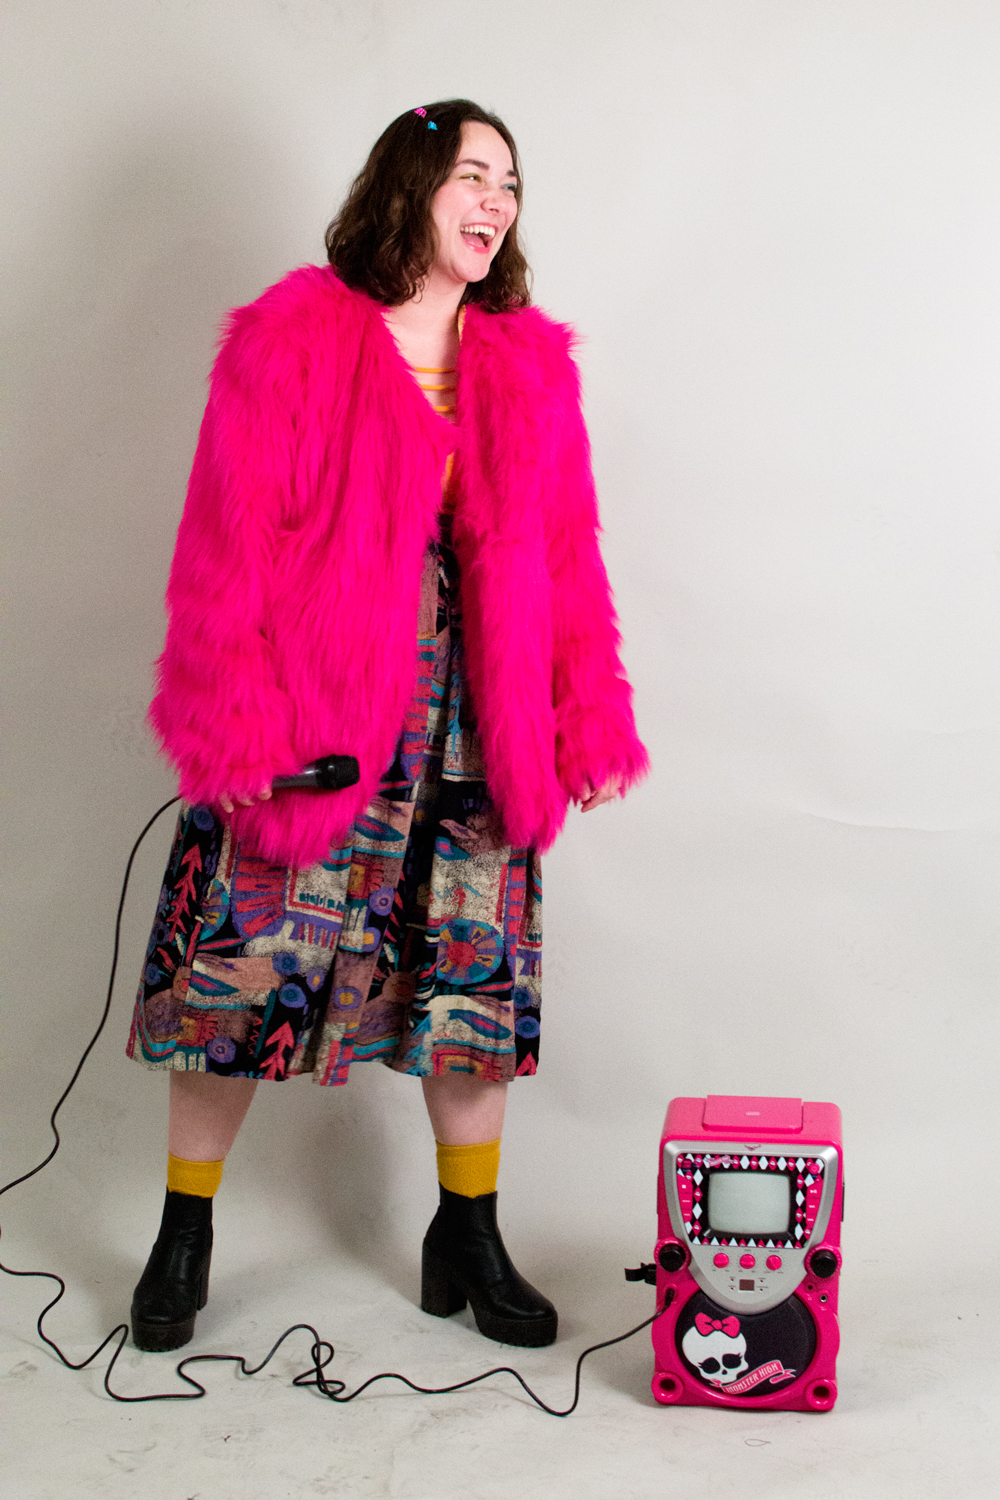 a picture of violet wearing a skirt, yellow socks, platform boots, and a bright pink faux fur coat. she's smiling and holding a microphone, looking off to the side. beside her is a monster high-branded karaoke machine.